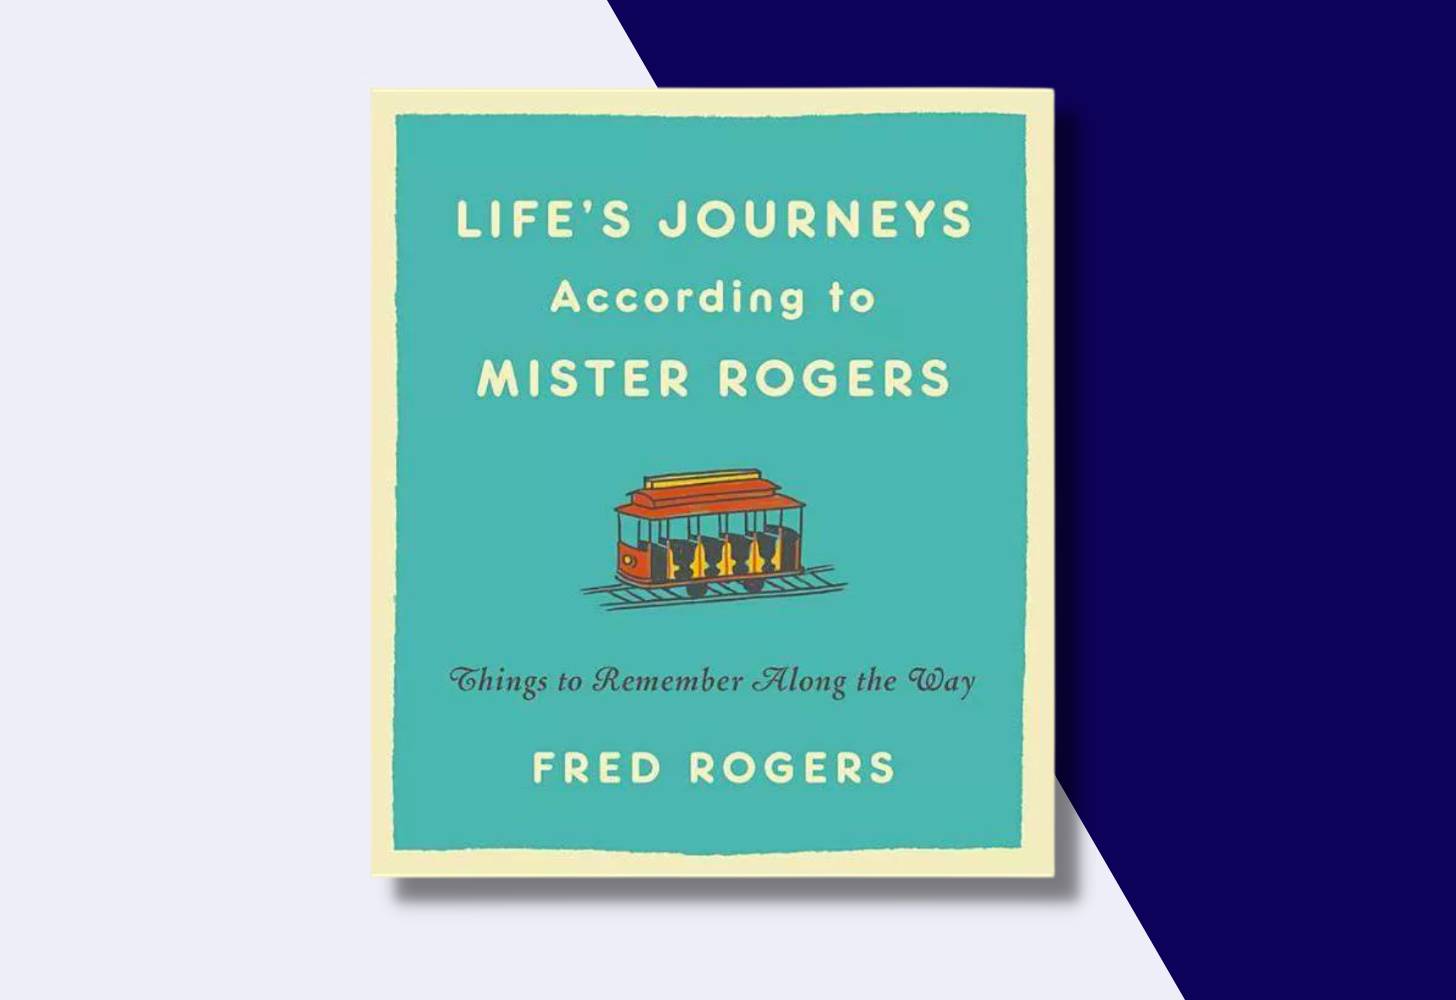 “Life’s Journeys According to Mister Rogers: Things to Remember Along the Way” by Fred Rogers